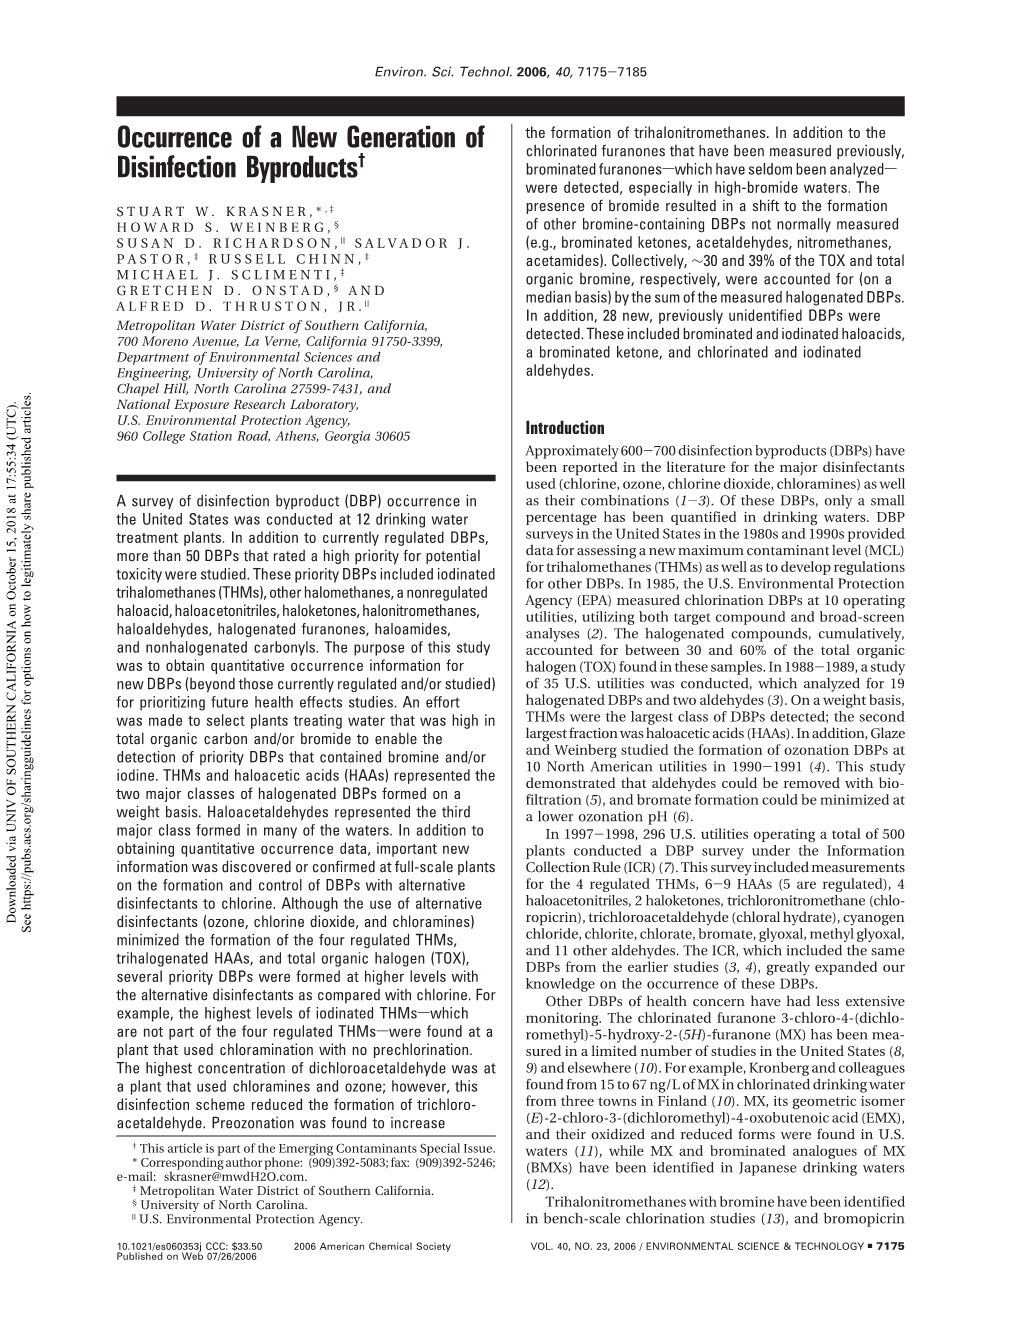 Occurrence of a New Generation of Disinfection Byproducts